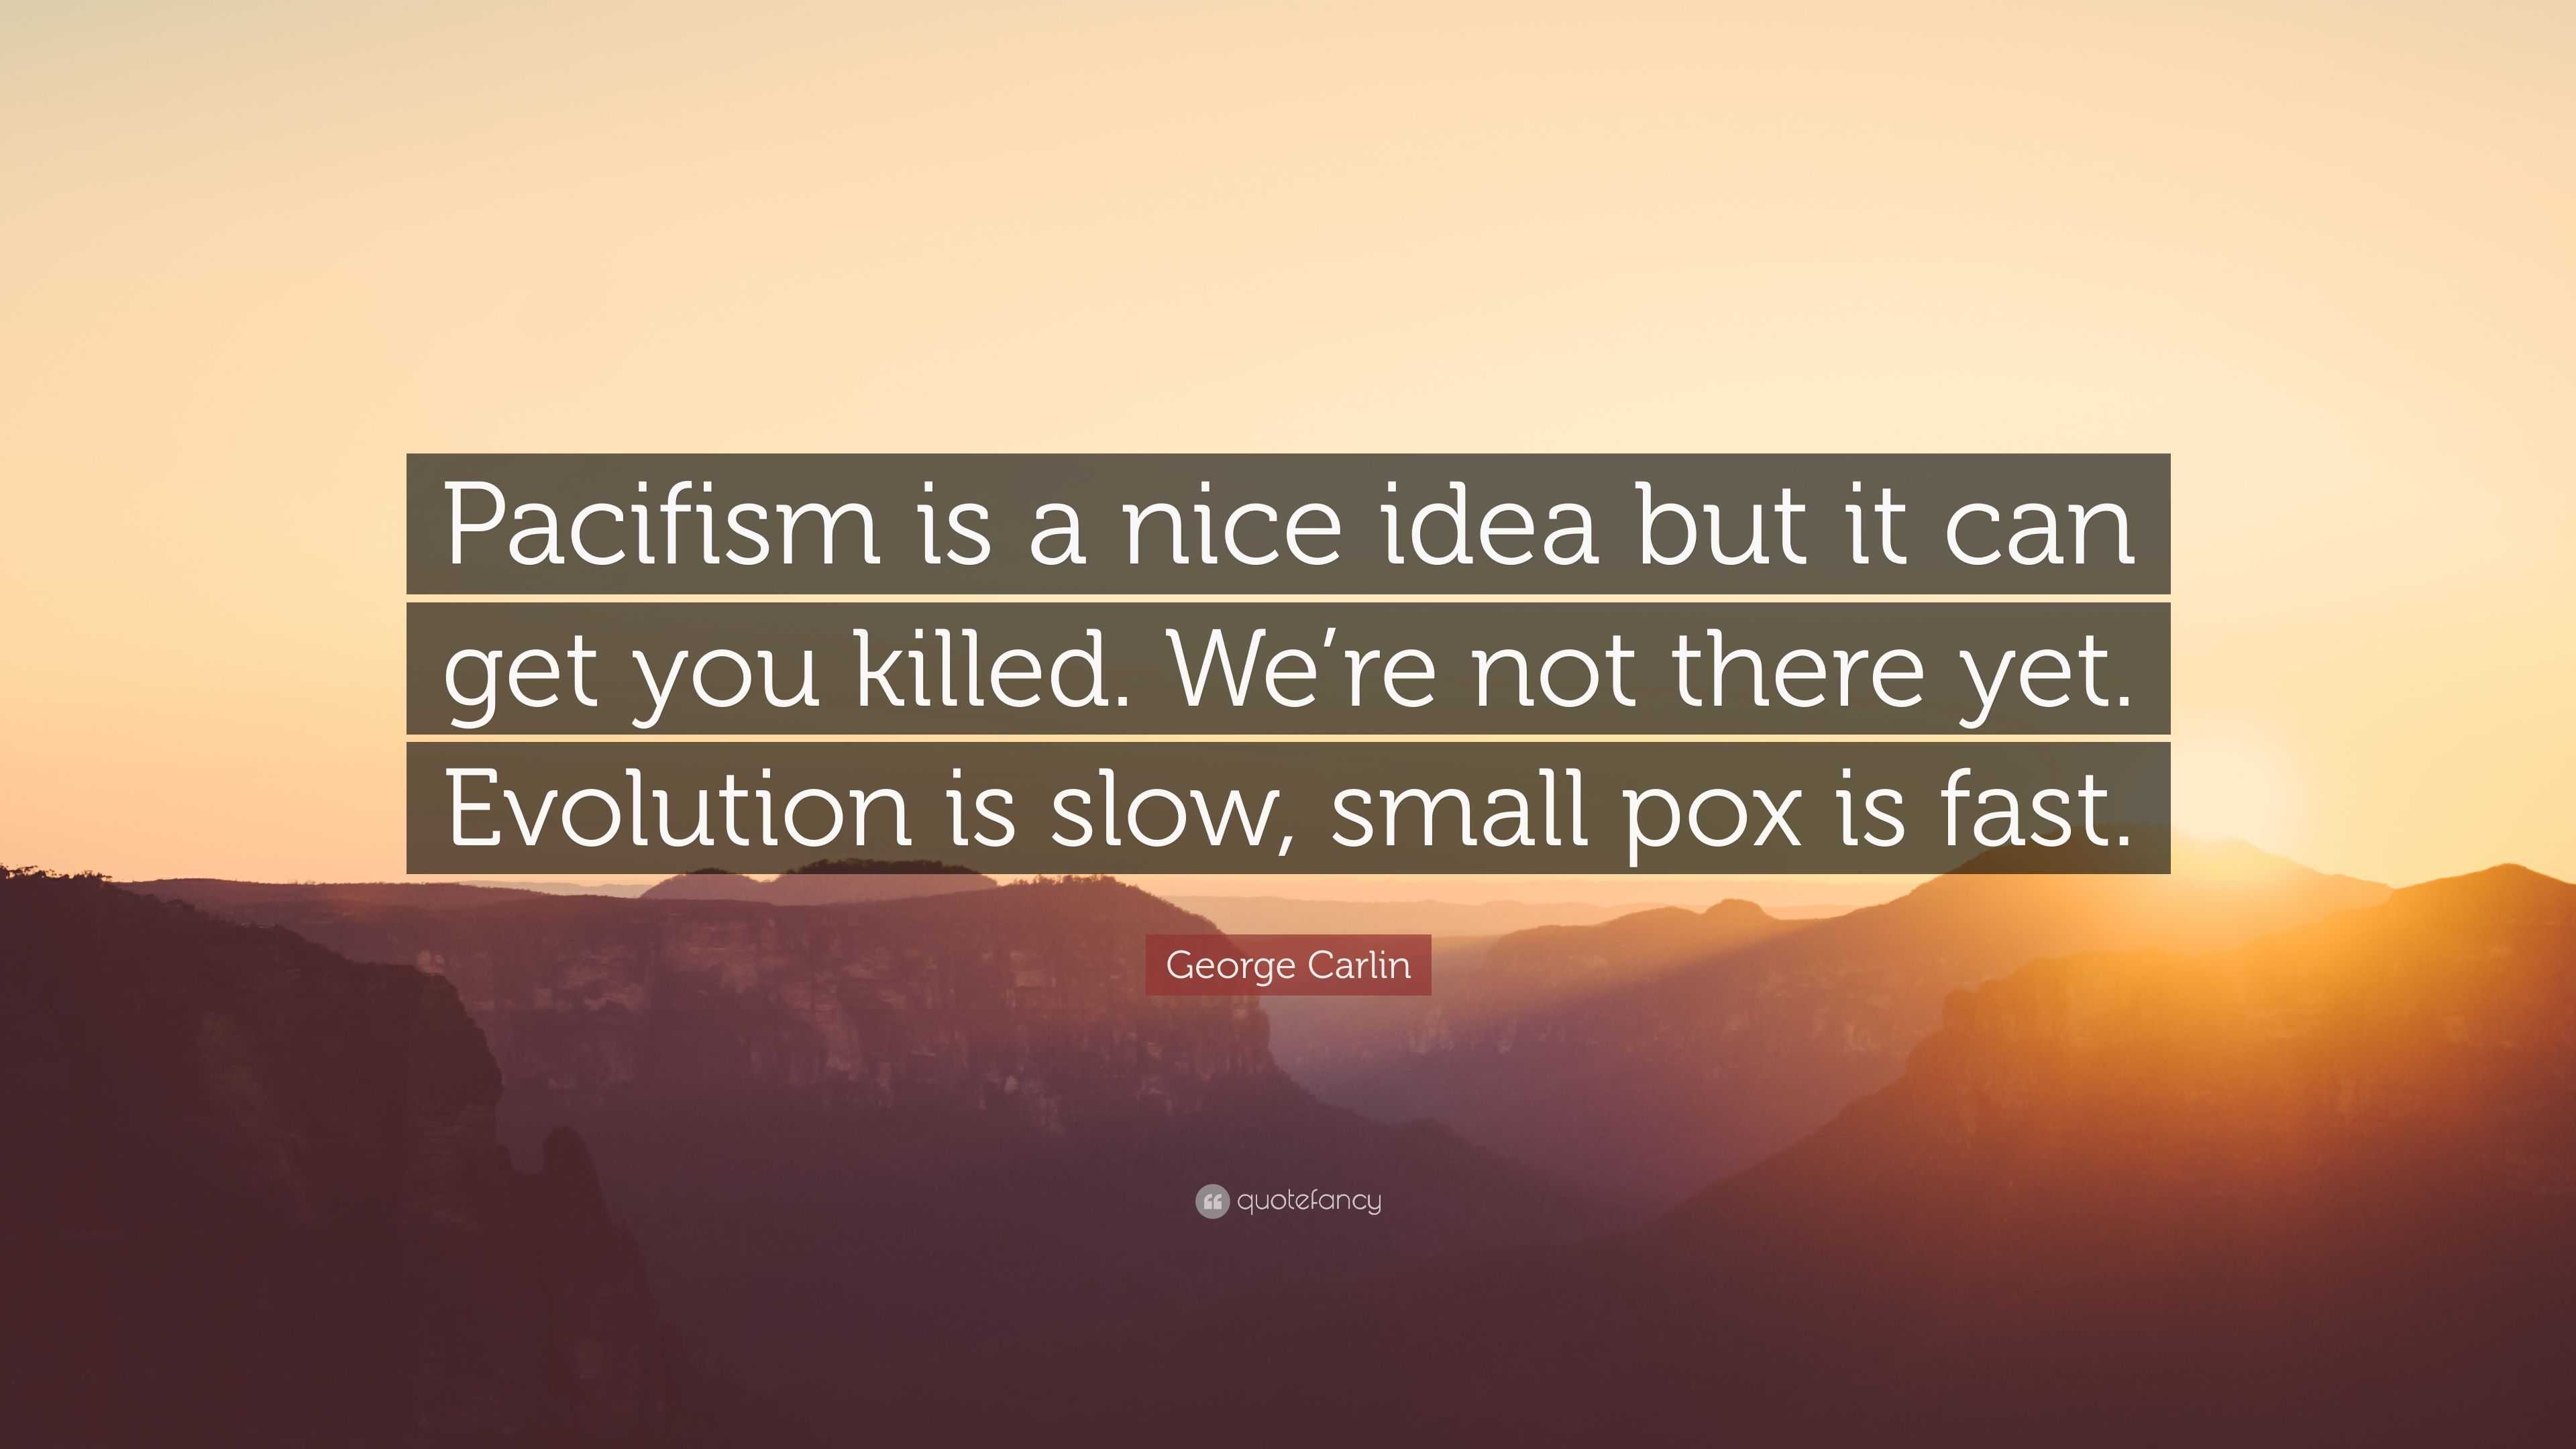 George Carlin Quote: "Pacifism is a nice idea but it can get you killed. We're not there yet ...